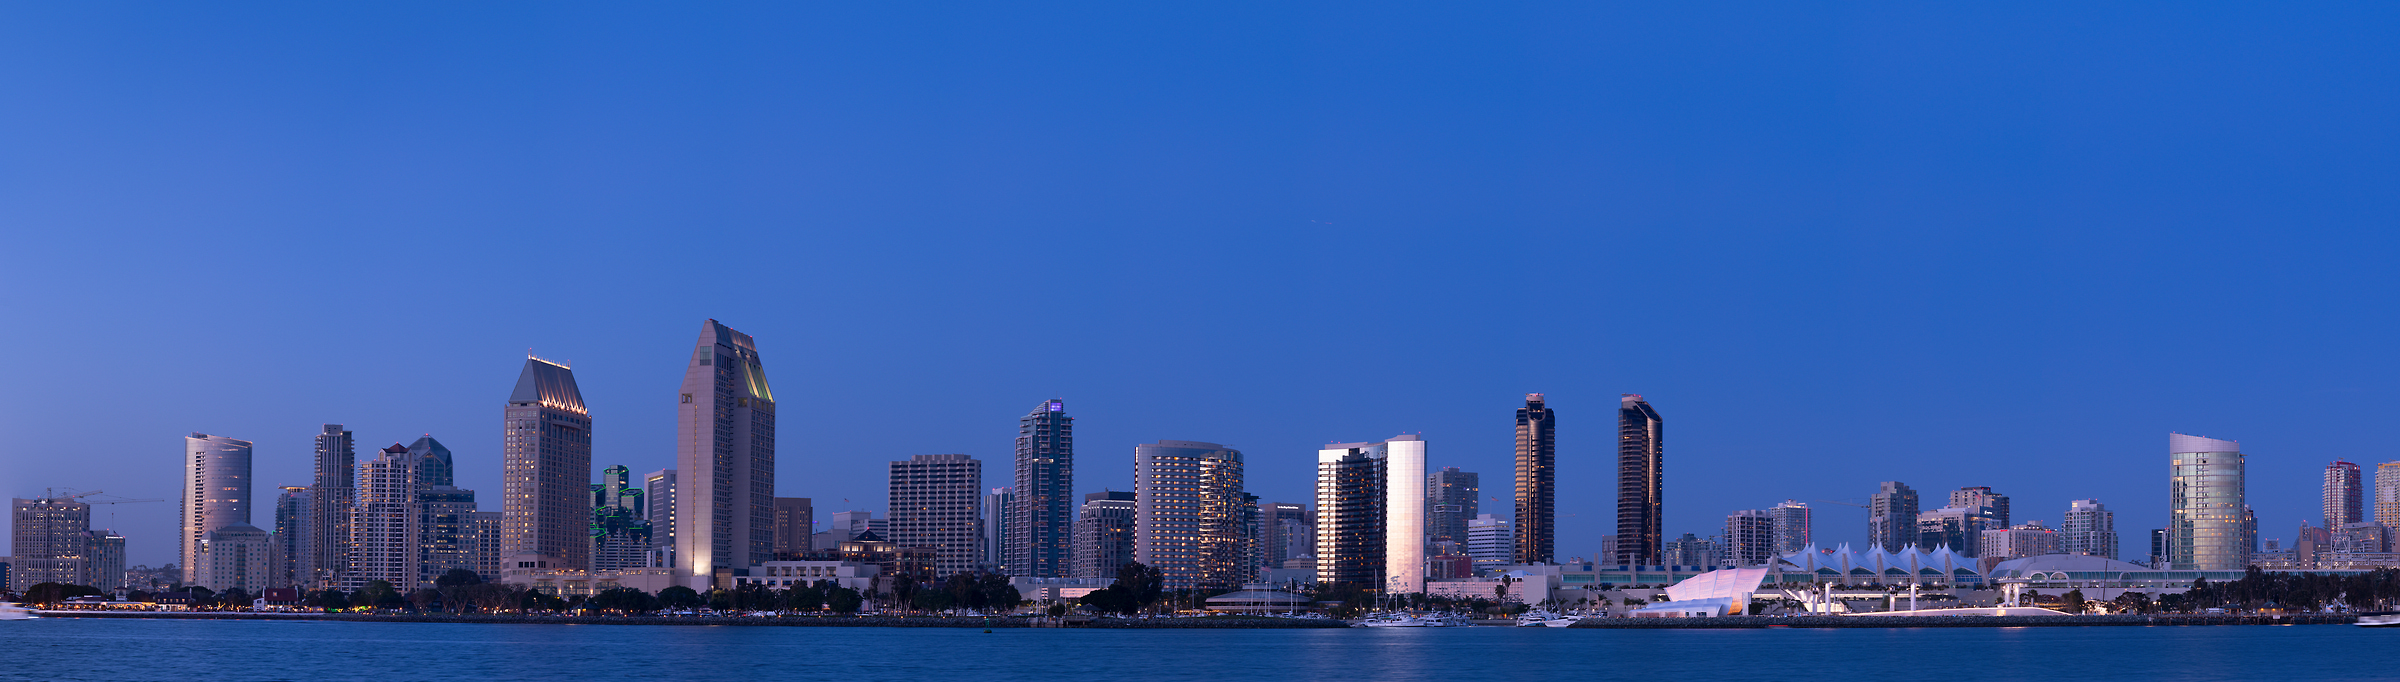 344 megapixels! A very high resolution, large-format VAST photo print of the San Diego skyline at evening; cityscape photograph created by Greg Probst in San Diego, California